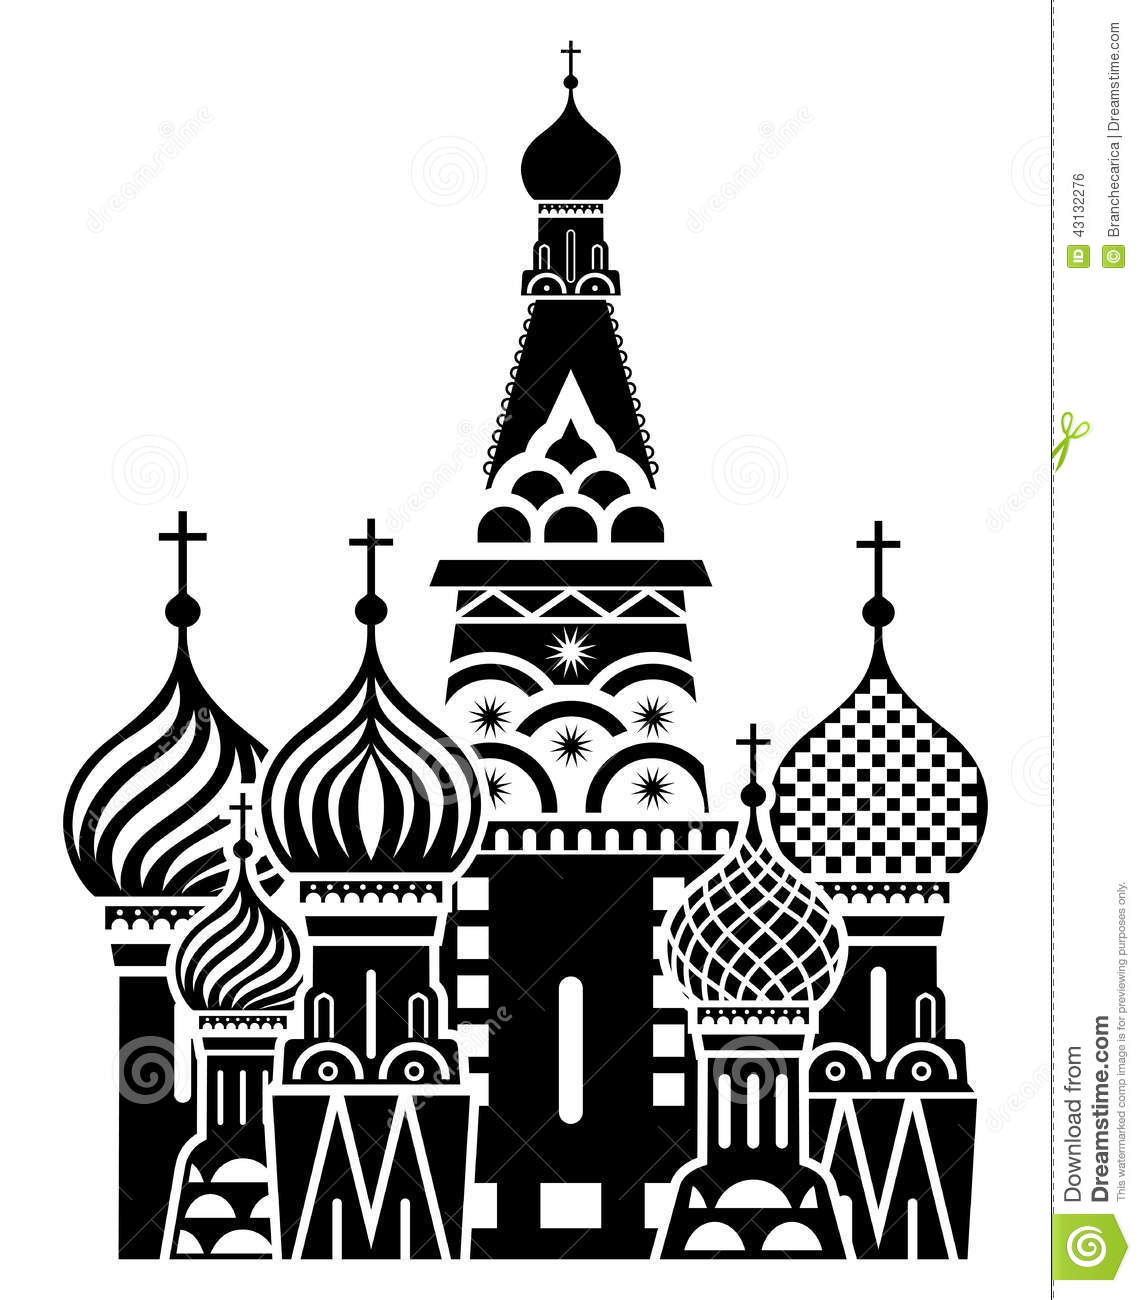 free vector clipart moscow - photo #34